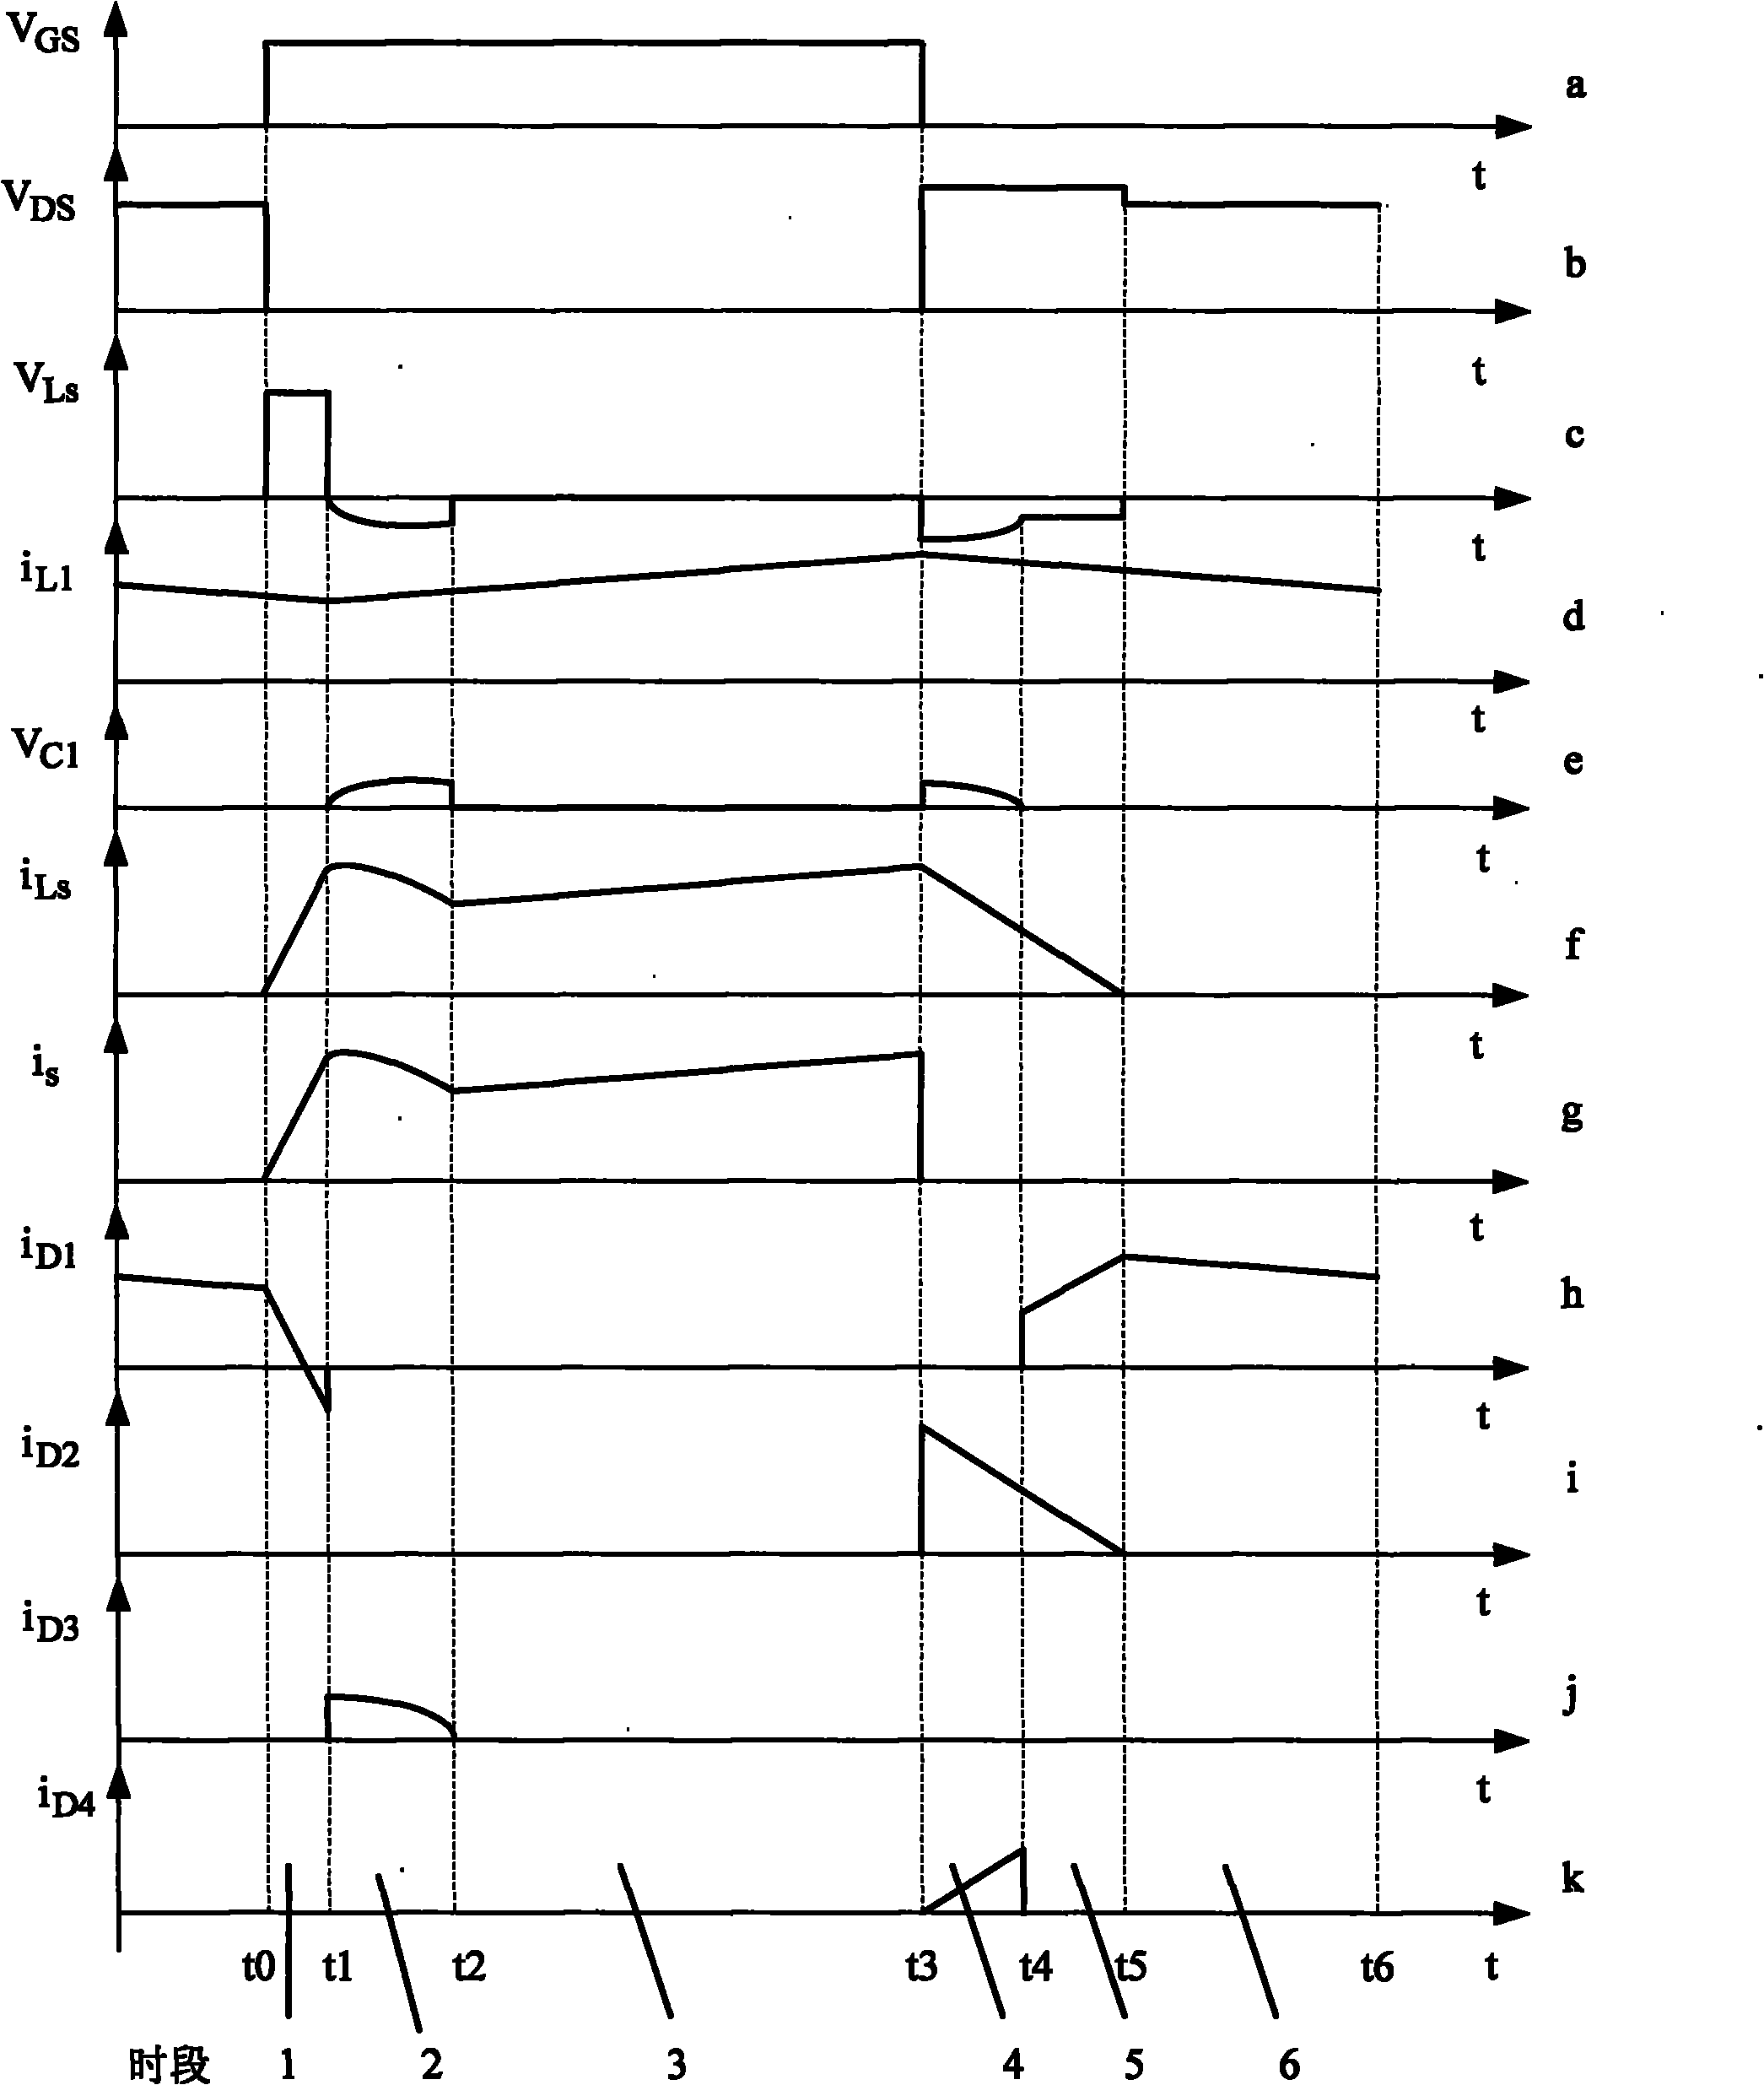 Power factor correction converter based on magnetic coupling lossless buffer circuit